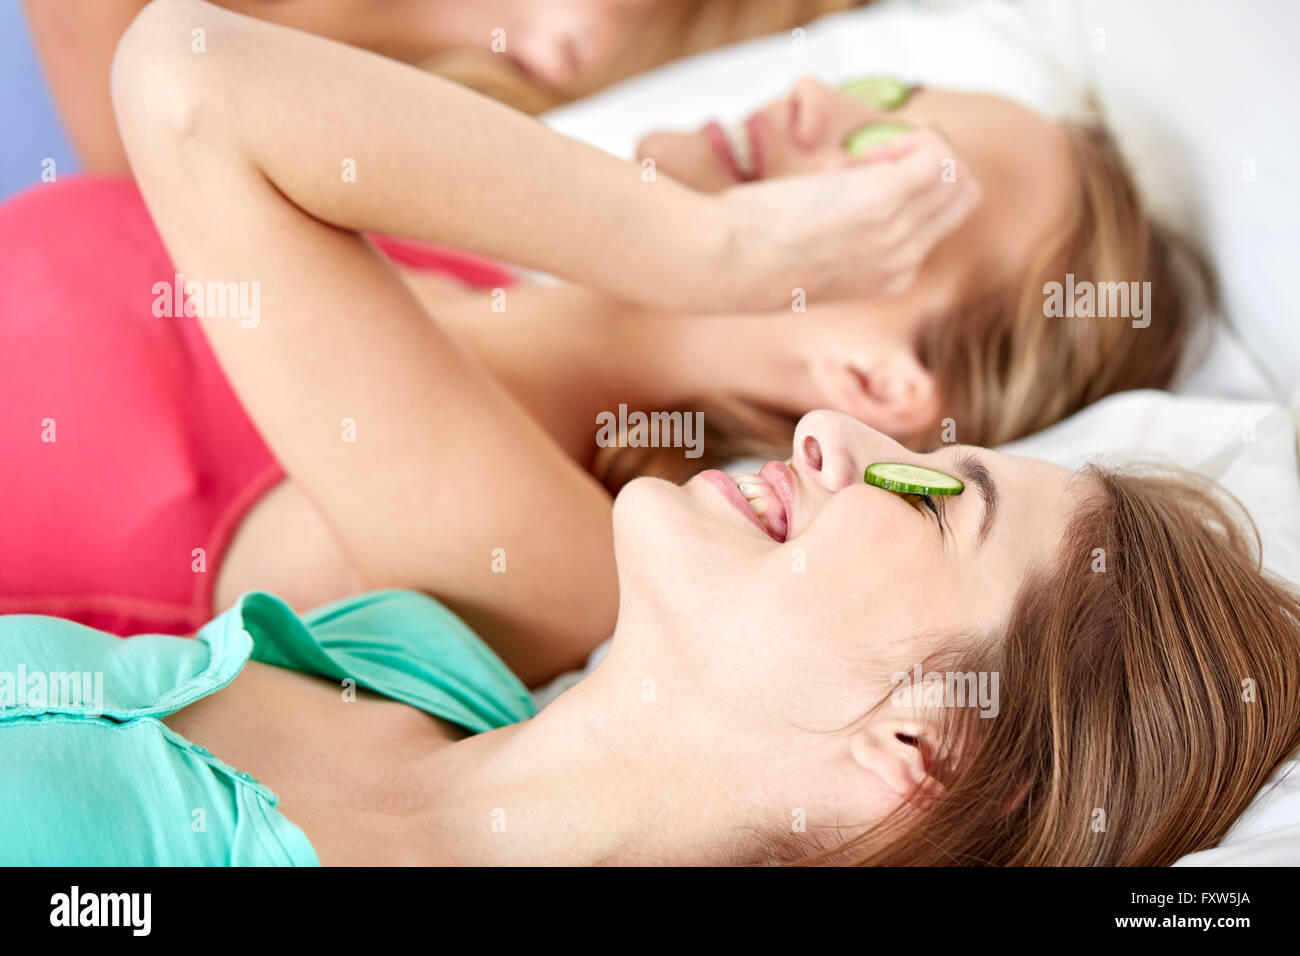 happy young women with cucumber mask lying in bed Stock Photo